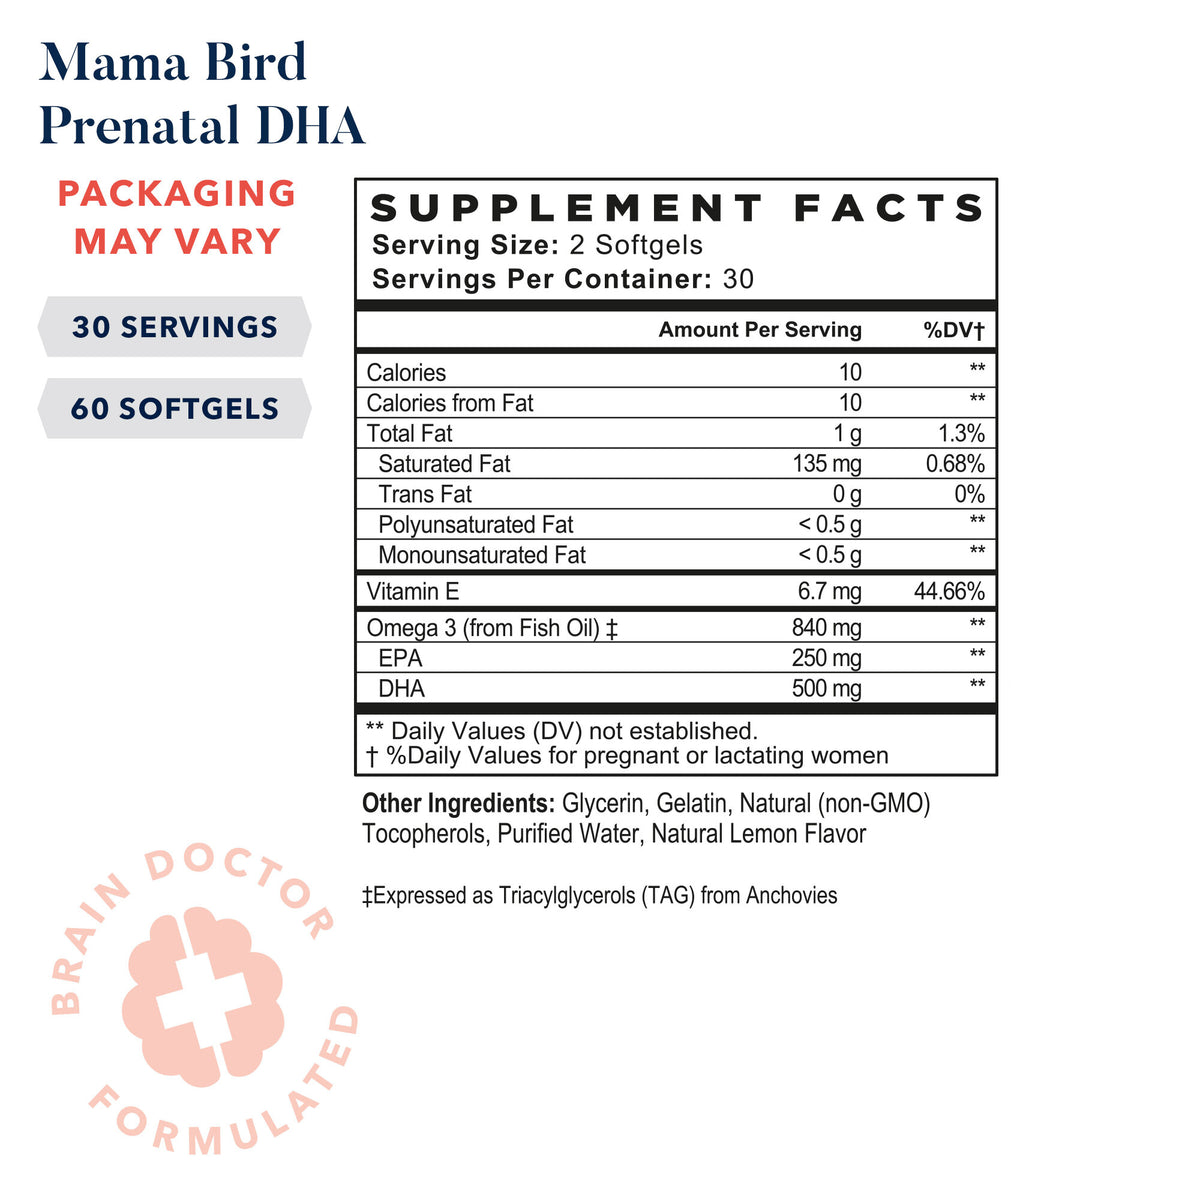 Mama Bird Prenatal DHA label with nutrition information and logo details for baby's brain development.